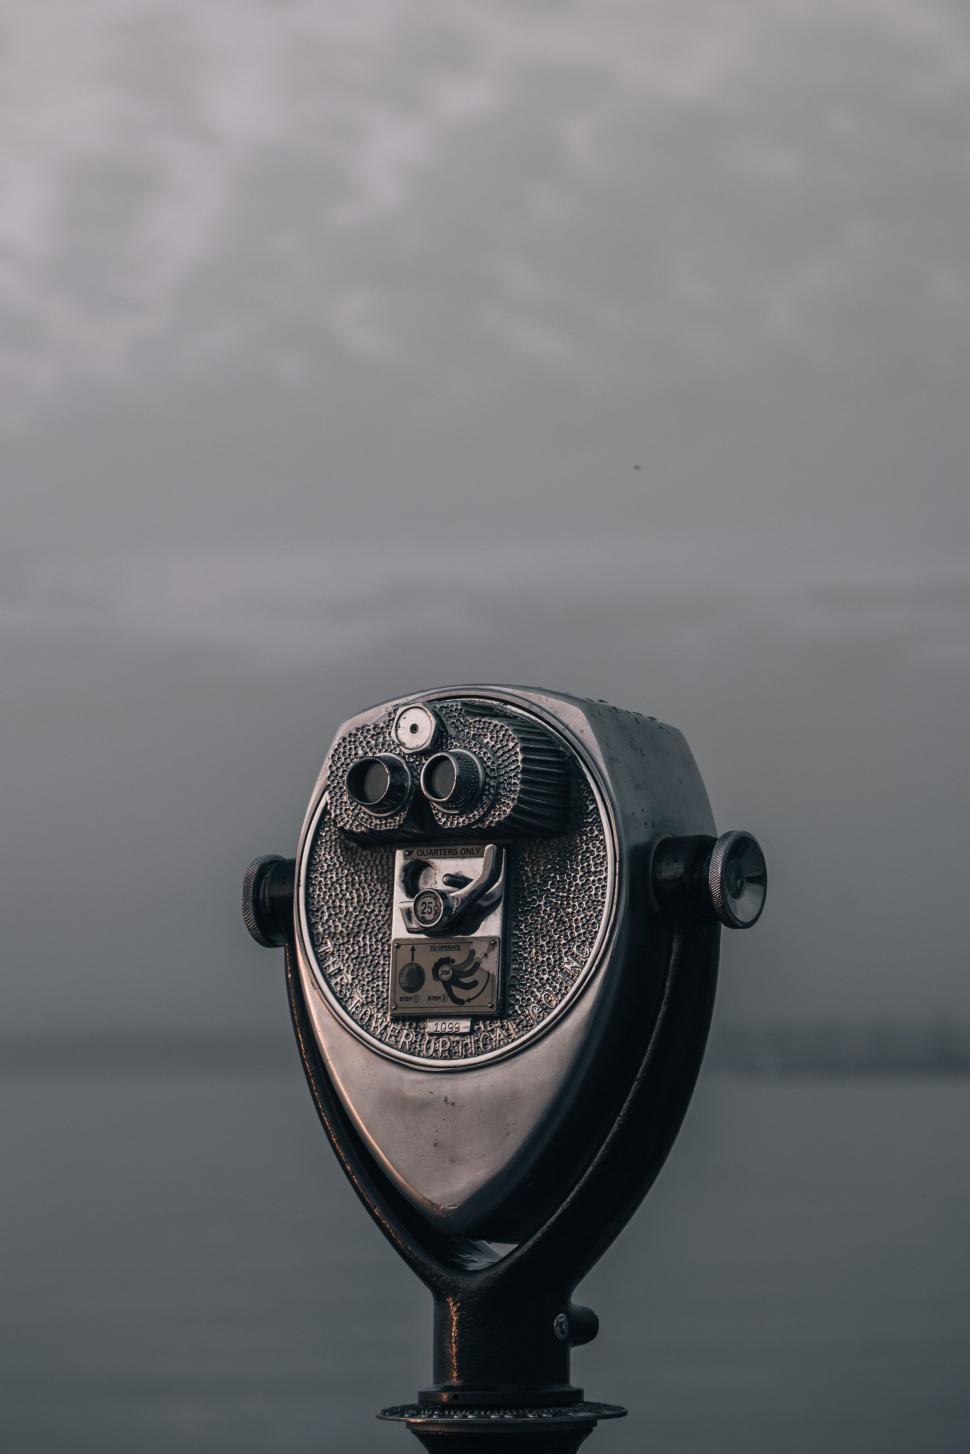 Free Image of Vintage coin-operated binoculars by the sea 